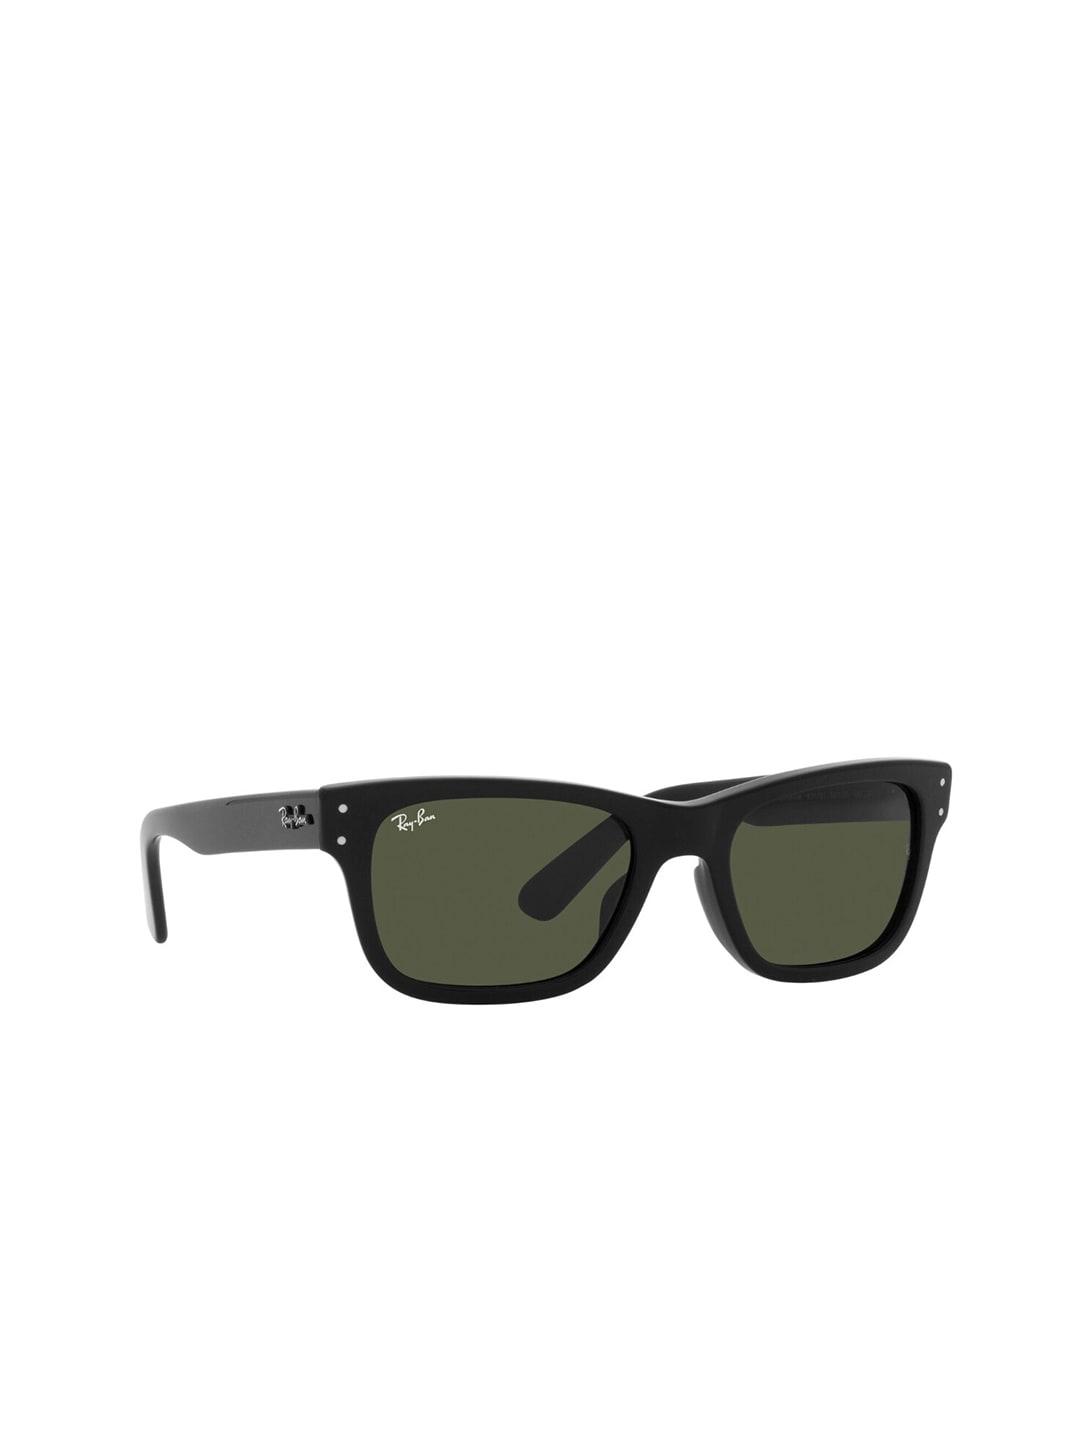 ray-ban-men-green-lens-&-black-rectangle-sunglasses-with-uv-protected-lens